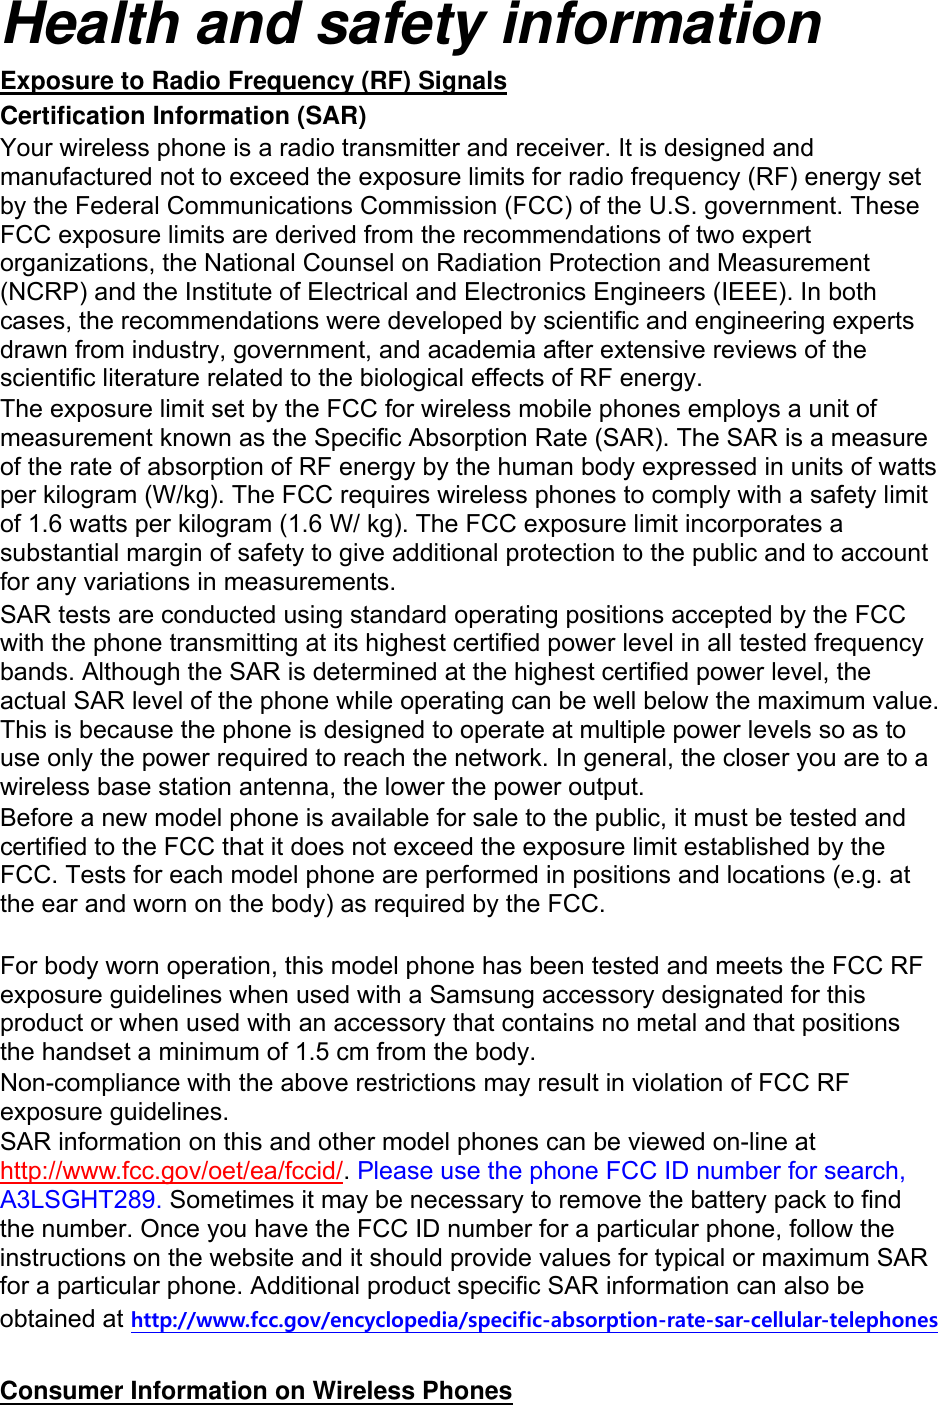 Health and safety information Exposure to Radio Frequency (RF) Signals Certification Information (SAR) Your wireless phone is a radio transmitter and receiver. It is designed and manufactured not to exceed the exposure limits for radio frequency (RF) energy set by the Federal Communications Commission (FCC) of the U.S. government. These FCC exposure limits are derived from the recommendations of two expert organizations, the National Counsel on Radiation Protection and Measurement (NCRP) and the Institute of Electrical and Electronics Engineers (IEEE). In both cases, the recommendations were developed by scientific and engineering experts drawn from industry, government, and academia after extensive reviews of the scientific literature related to the biological effects of RF energy. The exposure limit set by the FCC for wireless mobile phones employs a unit of measurement known as the Specific Absorption Rate (SAR). The SAR is a measure of the rate of absorption of RF energy by the human body expressed in units of watts per kilogram (W/kg). The FCC requires wireless phones to comply with a safety limit of 1.6 watts per kilogram (1.6 W/ kg). The FCC exposure limit incorporates a substantial margin of safety to give additional protection to the public and to account for any variations in measurements. SAR tests are conducted using standard operating positions accepted by the FCC with the phone transmitting at its highest certified power level in all tested frequency bands. Although the SAR is determined at the highest certified power level, the actual SAR level of the phone while operating can be well below the maximum value. This is because the phone is designed to operate at multiple power levels so as to use only the power required to reach the network. In general, the closer you are to a wireless base station antenna, the lower the power output. Before a new model phone is available for sale to the public, it must be tested and certified to the FCC that it does not exceed the exposure limit established by the FCC. Tests for each model phone are performed in positions and locations (e.g. at the ear and worn on the body) as required by the FCC.      For body worn operation, this model phone has been tested and meets the FCC RF exposure guidelines when used with a Samsung accessory designated for this product or when used with an accessory that contains no metal and that positions the handset a minimum of 1.5 cm from the body.   Non-compliance with the above restrictions may result in violation of FCC RF exposure guidelines. SAR information on this and other model phones can be viewed on-line at http://www.fcc.gov/oet/ea/fccid/. Please use the phone FCC ID number for search, A3LSGHT289. Sometimes it may be necessary to remove the battery pack to find the number. Once you have the FCC ID number for a particular phone, follow the instructions on the website and it should provide values for typical or maximum SAR for a particular phone. Additional product specific SAR information can also be obtained at http://www.fcc.gov/encyclopedia/specific-absorption-rate-sar-cellular-telephones  Consumer Information on Wireless Phones 